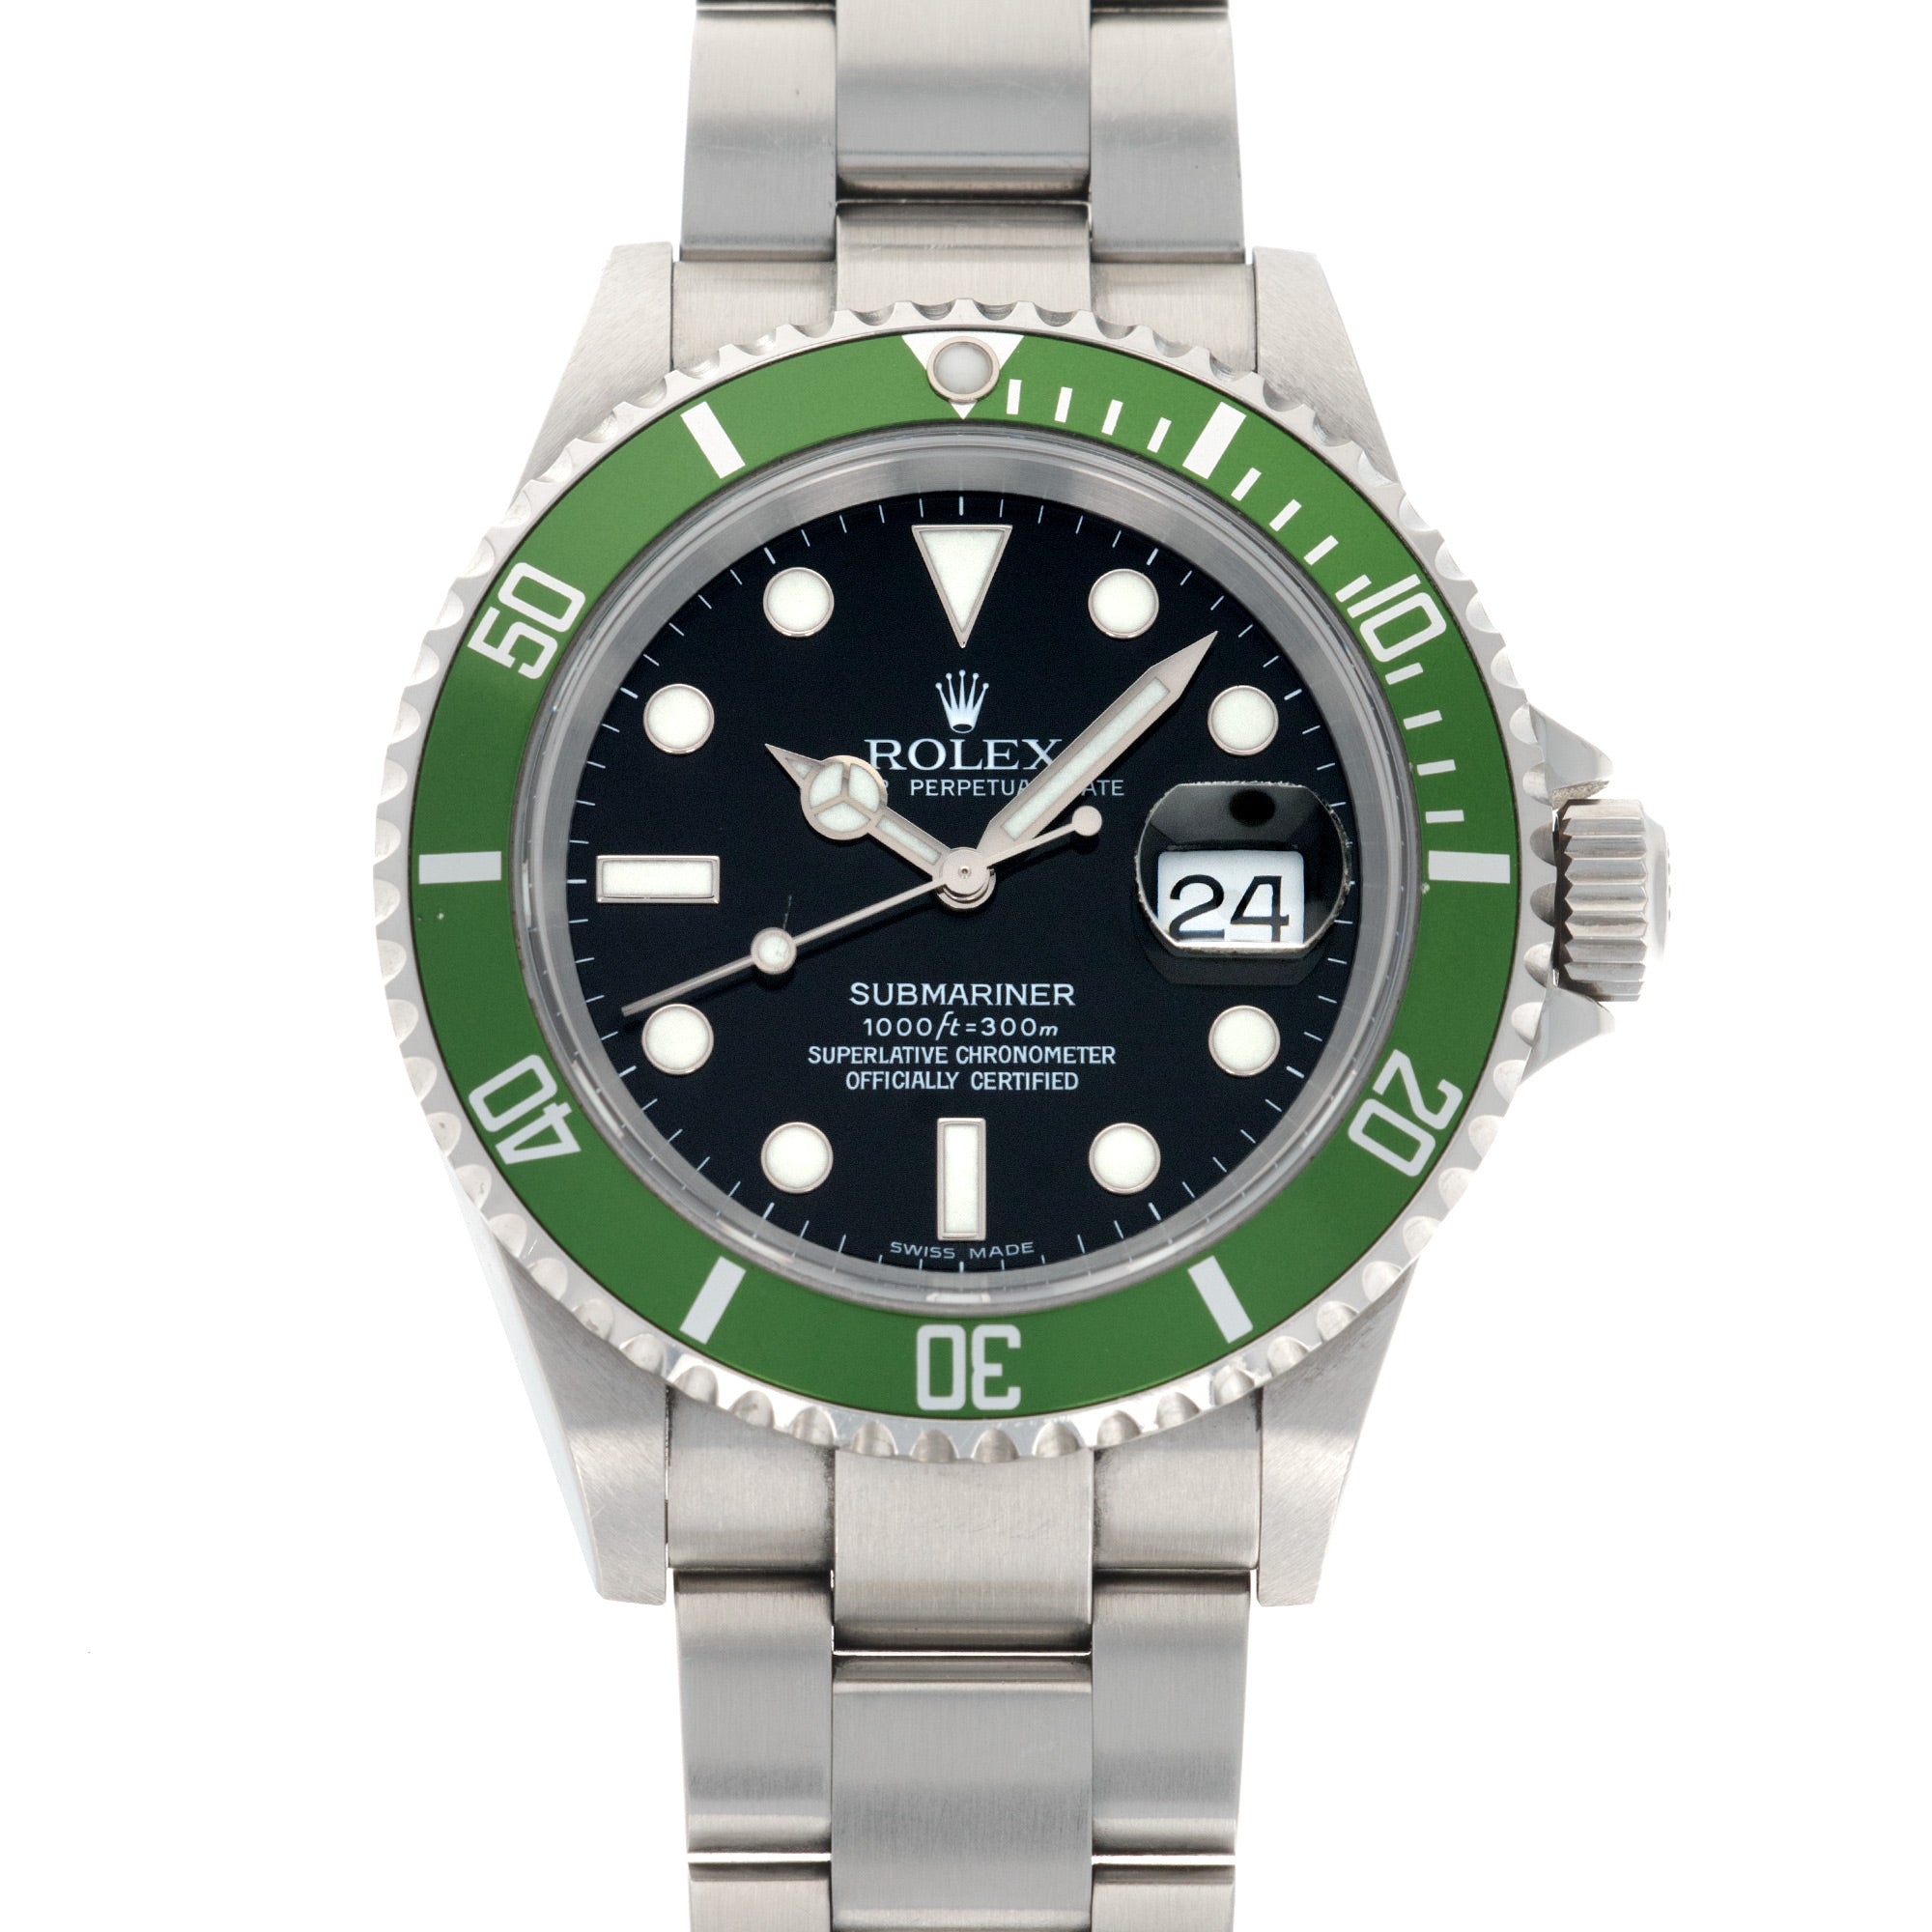 Rolex - Rolex Submariner Anniversary Watch Ref. 16610, with Original Box and Papers - The Keystone Watches